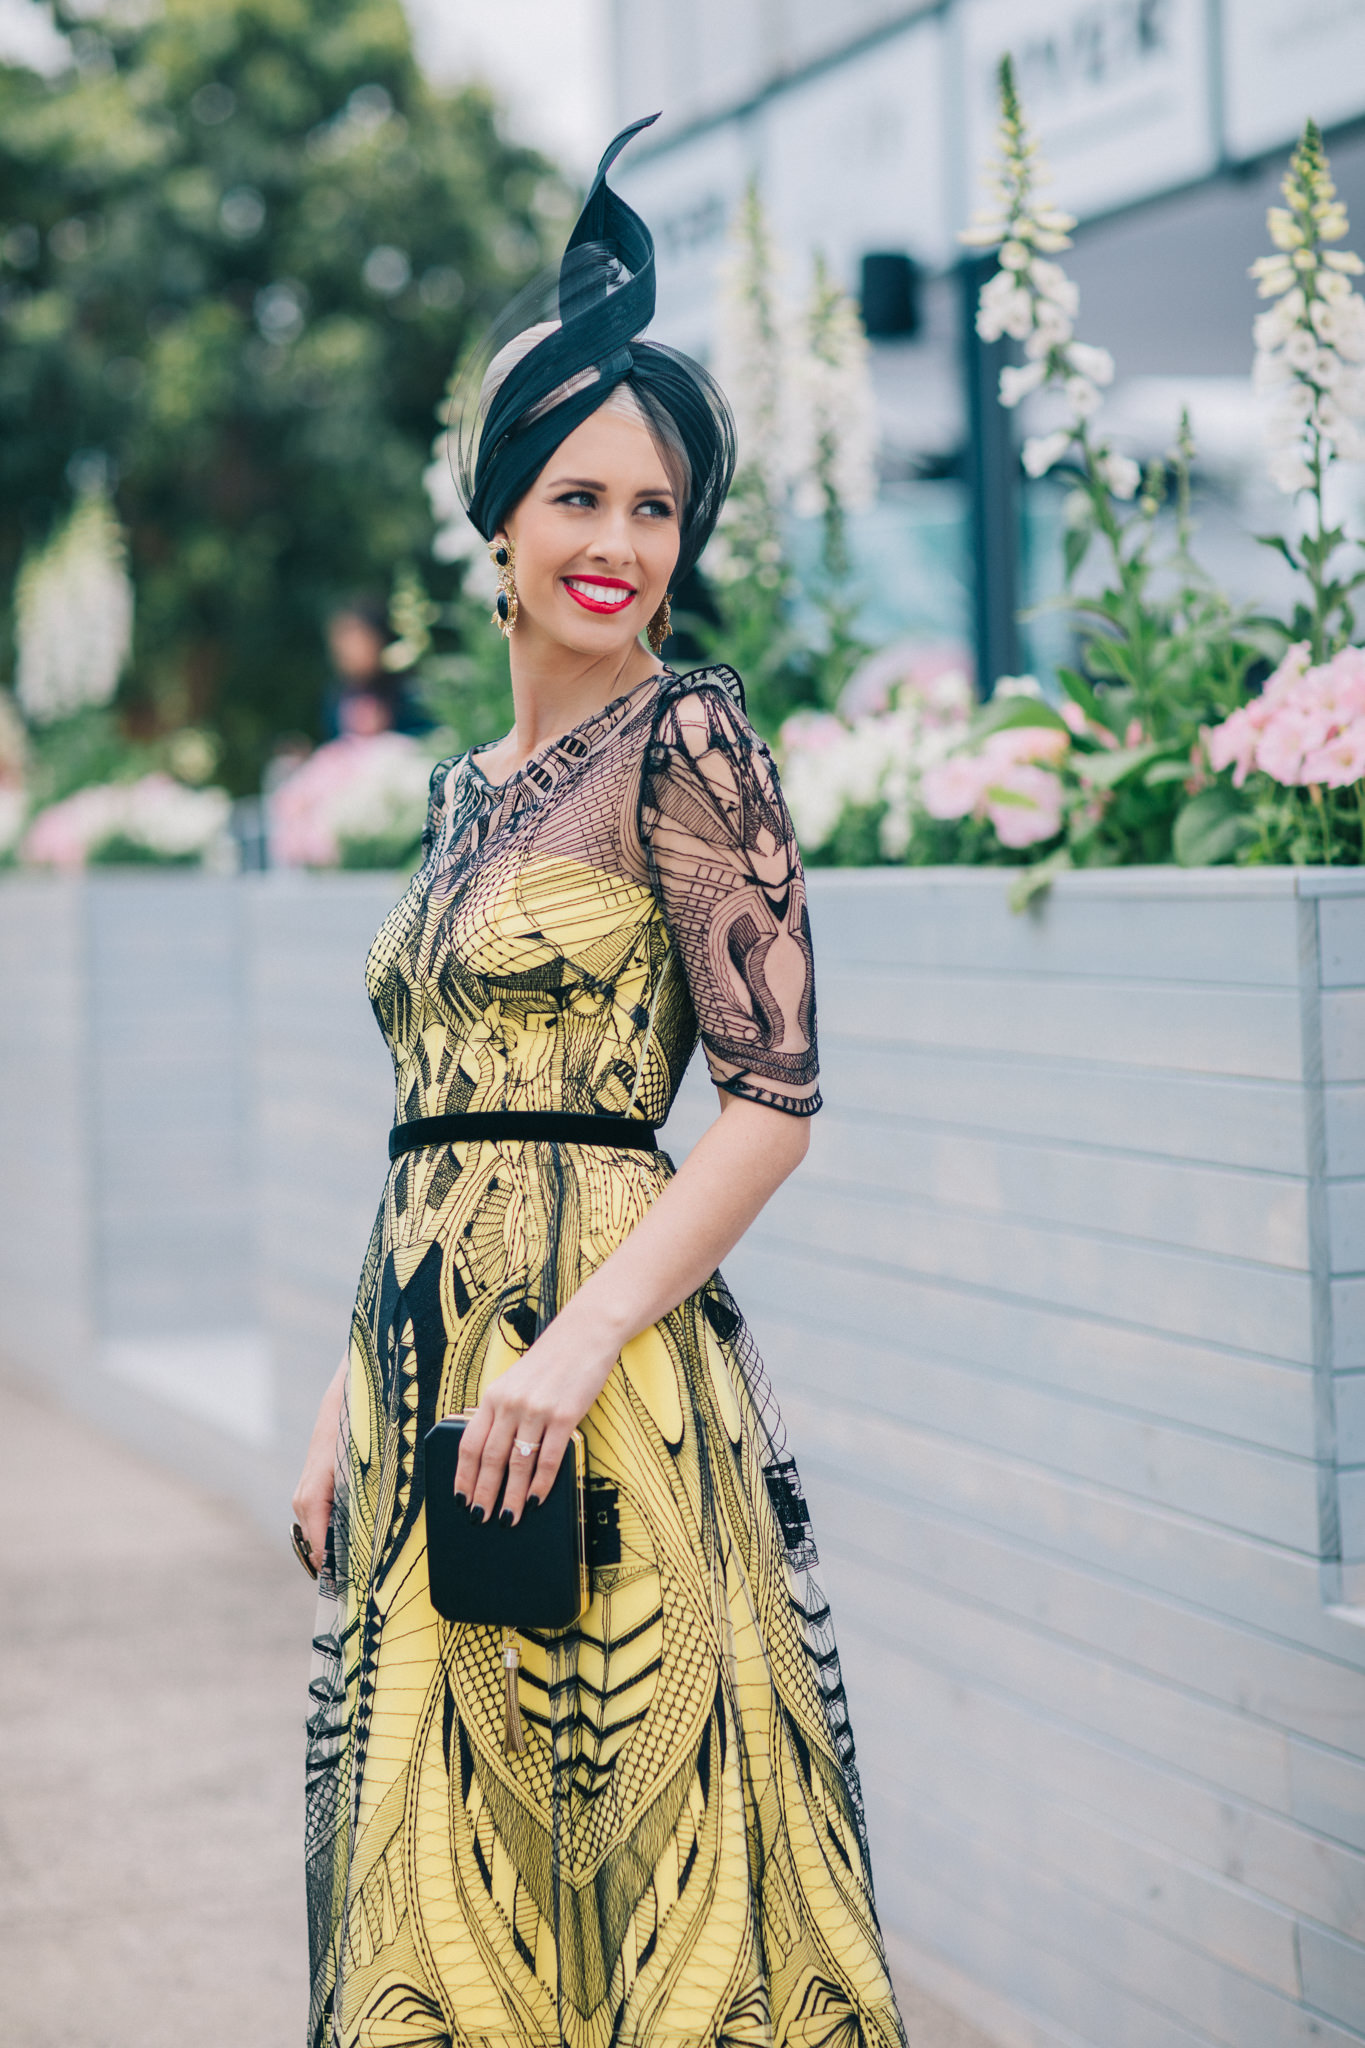 Melbourne Cup fashion trends